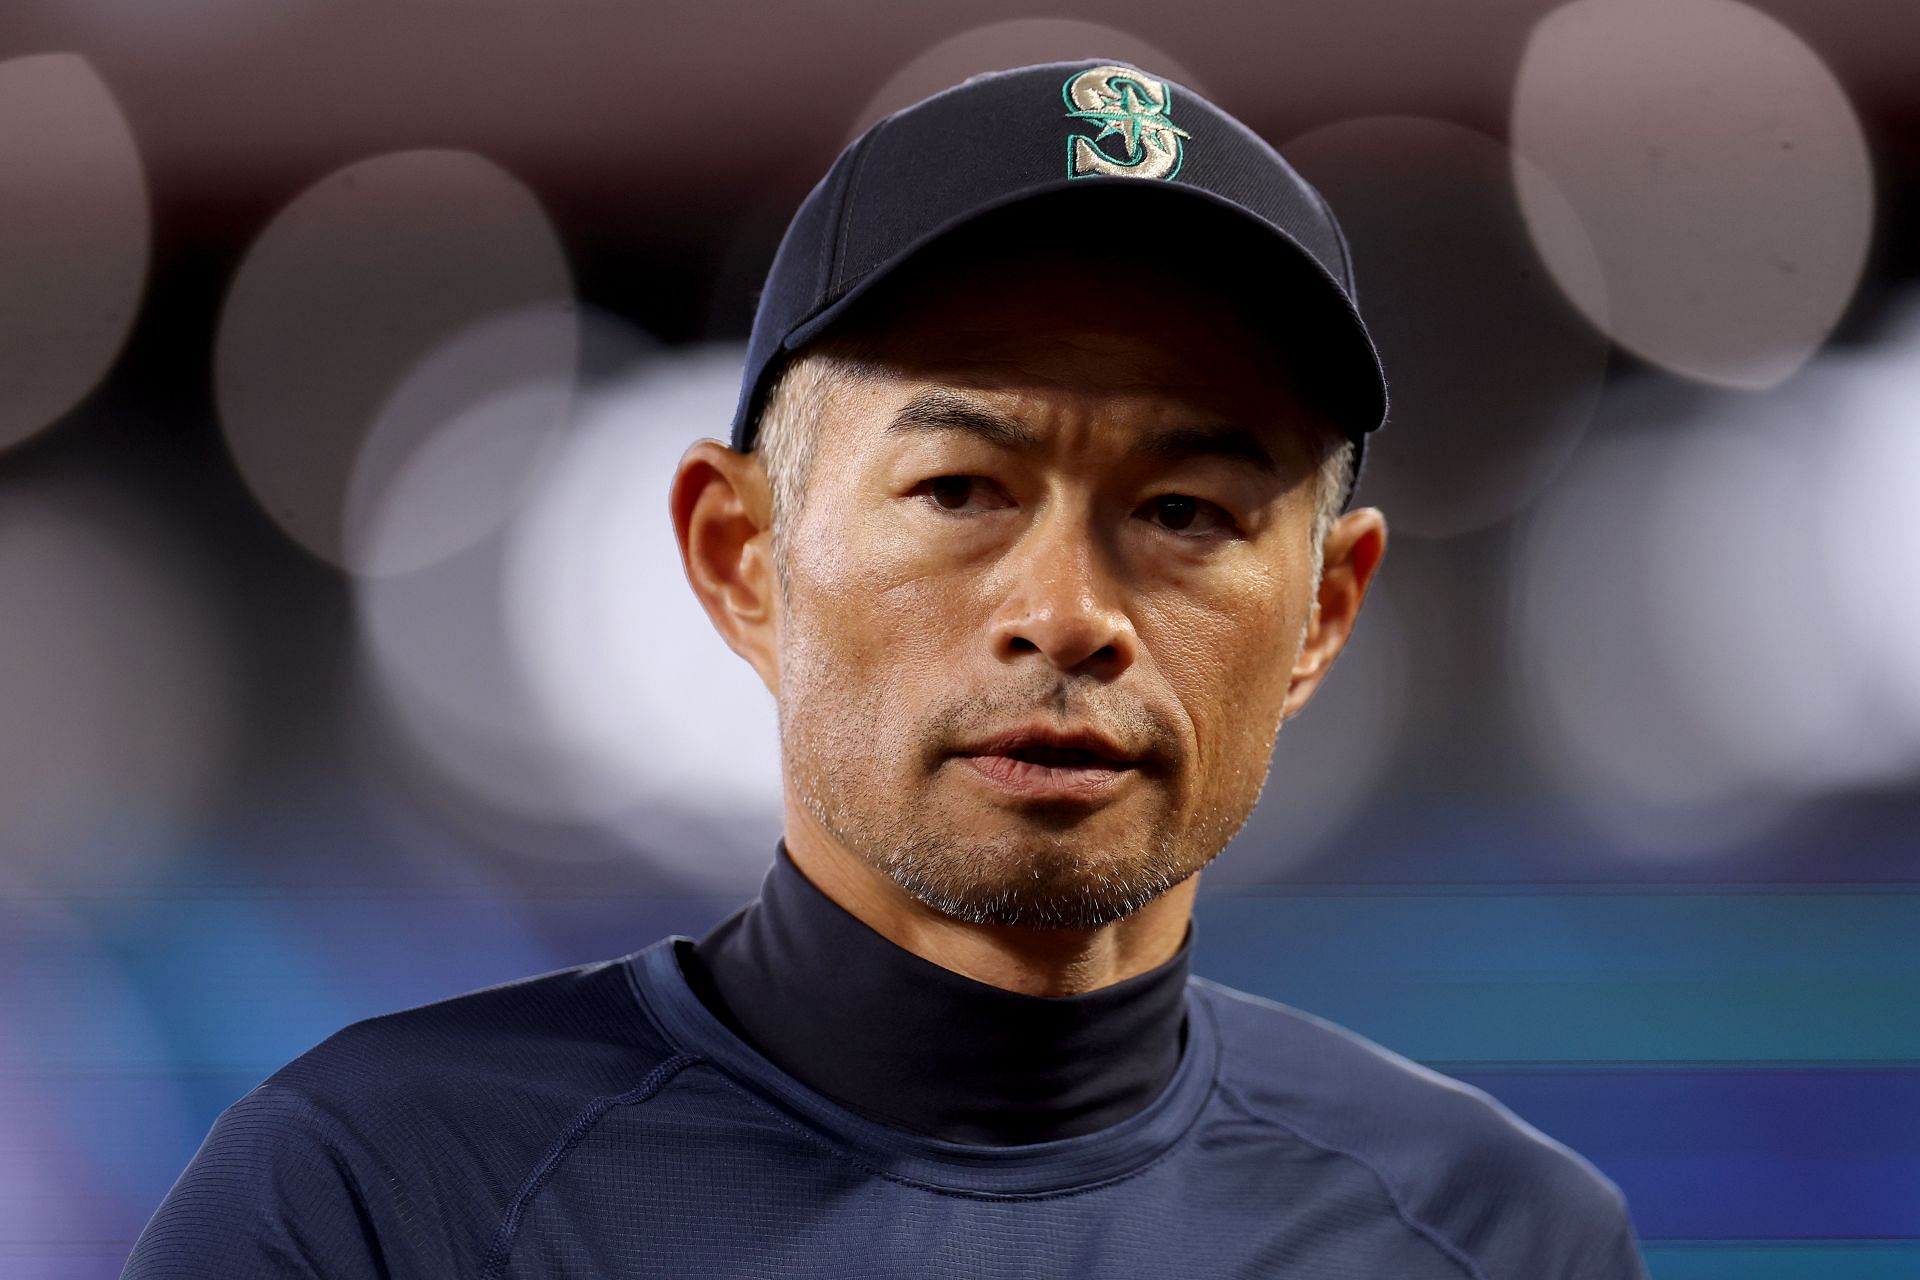 Ichiro Suzuki once patched things up with his wife after a sex scandal with a Japanese housewife pic